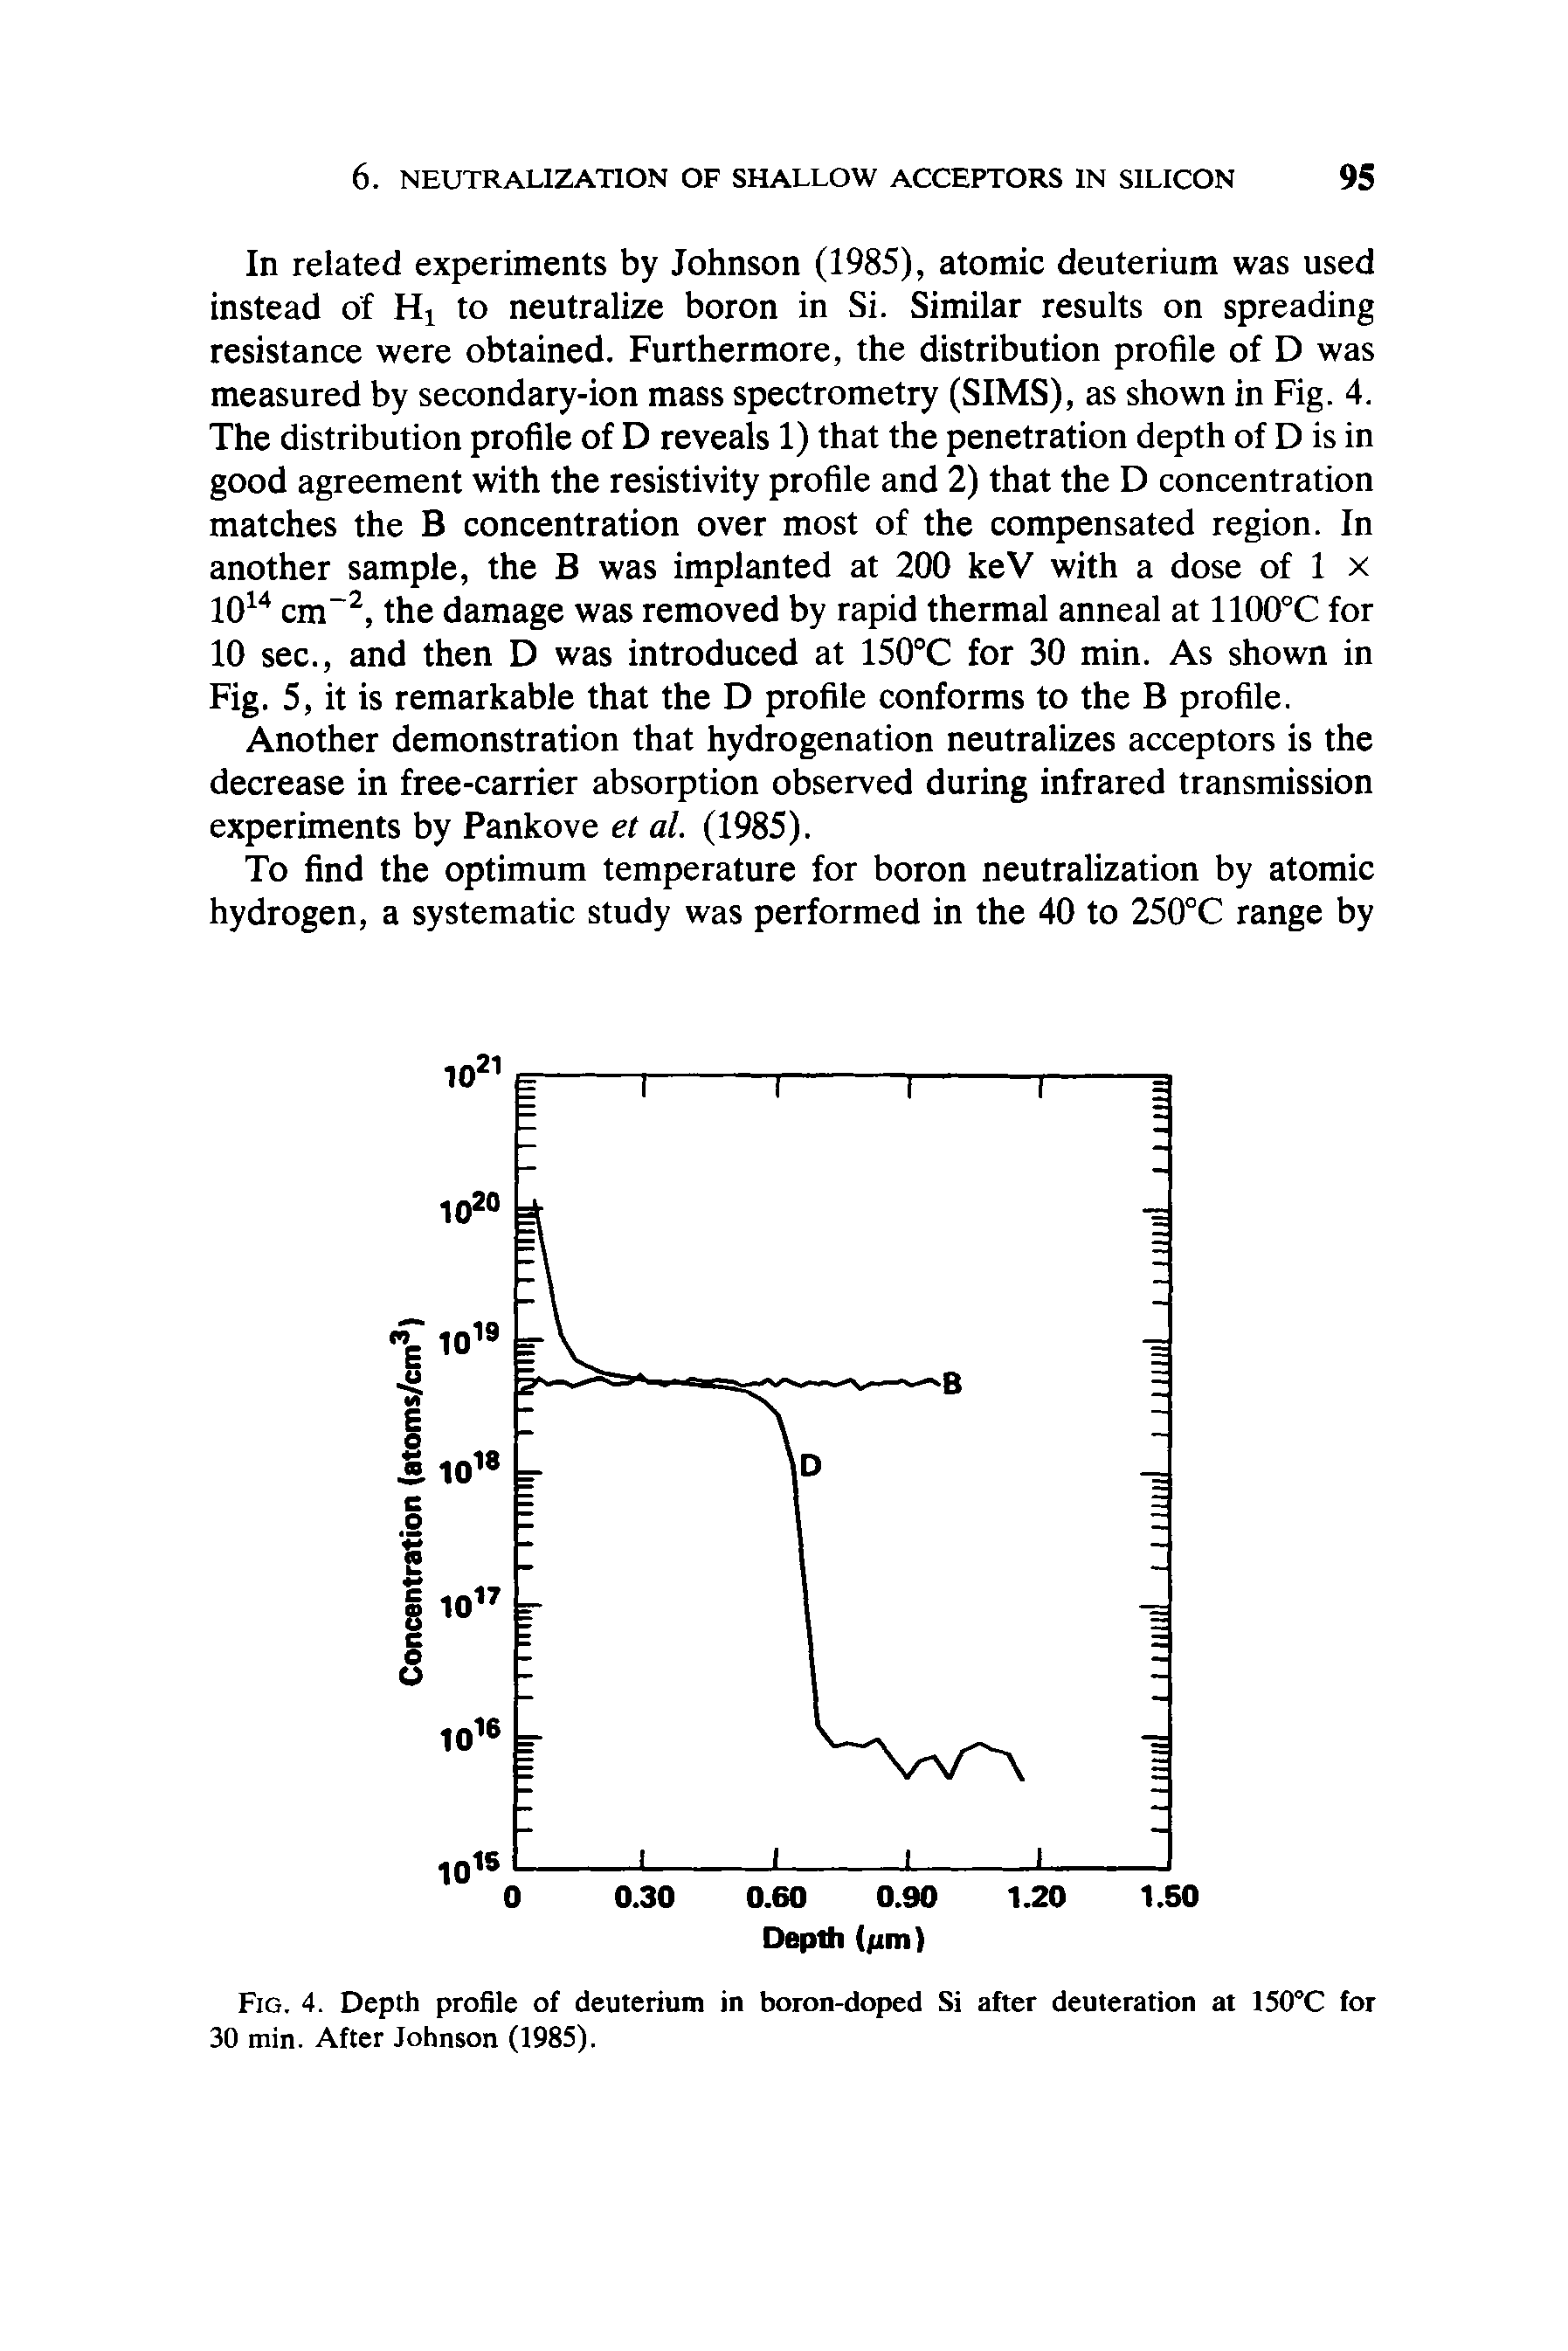 Fig. 4. Depth profile of deuterium in boron-doped Si after deuteration at 150°C for 30 min. After Johnson (1985).